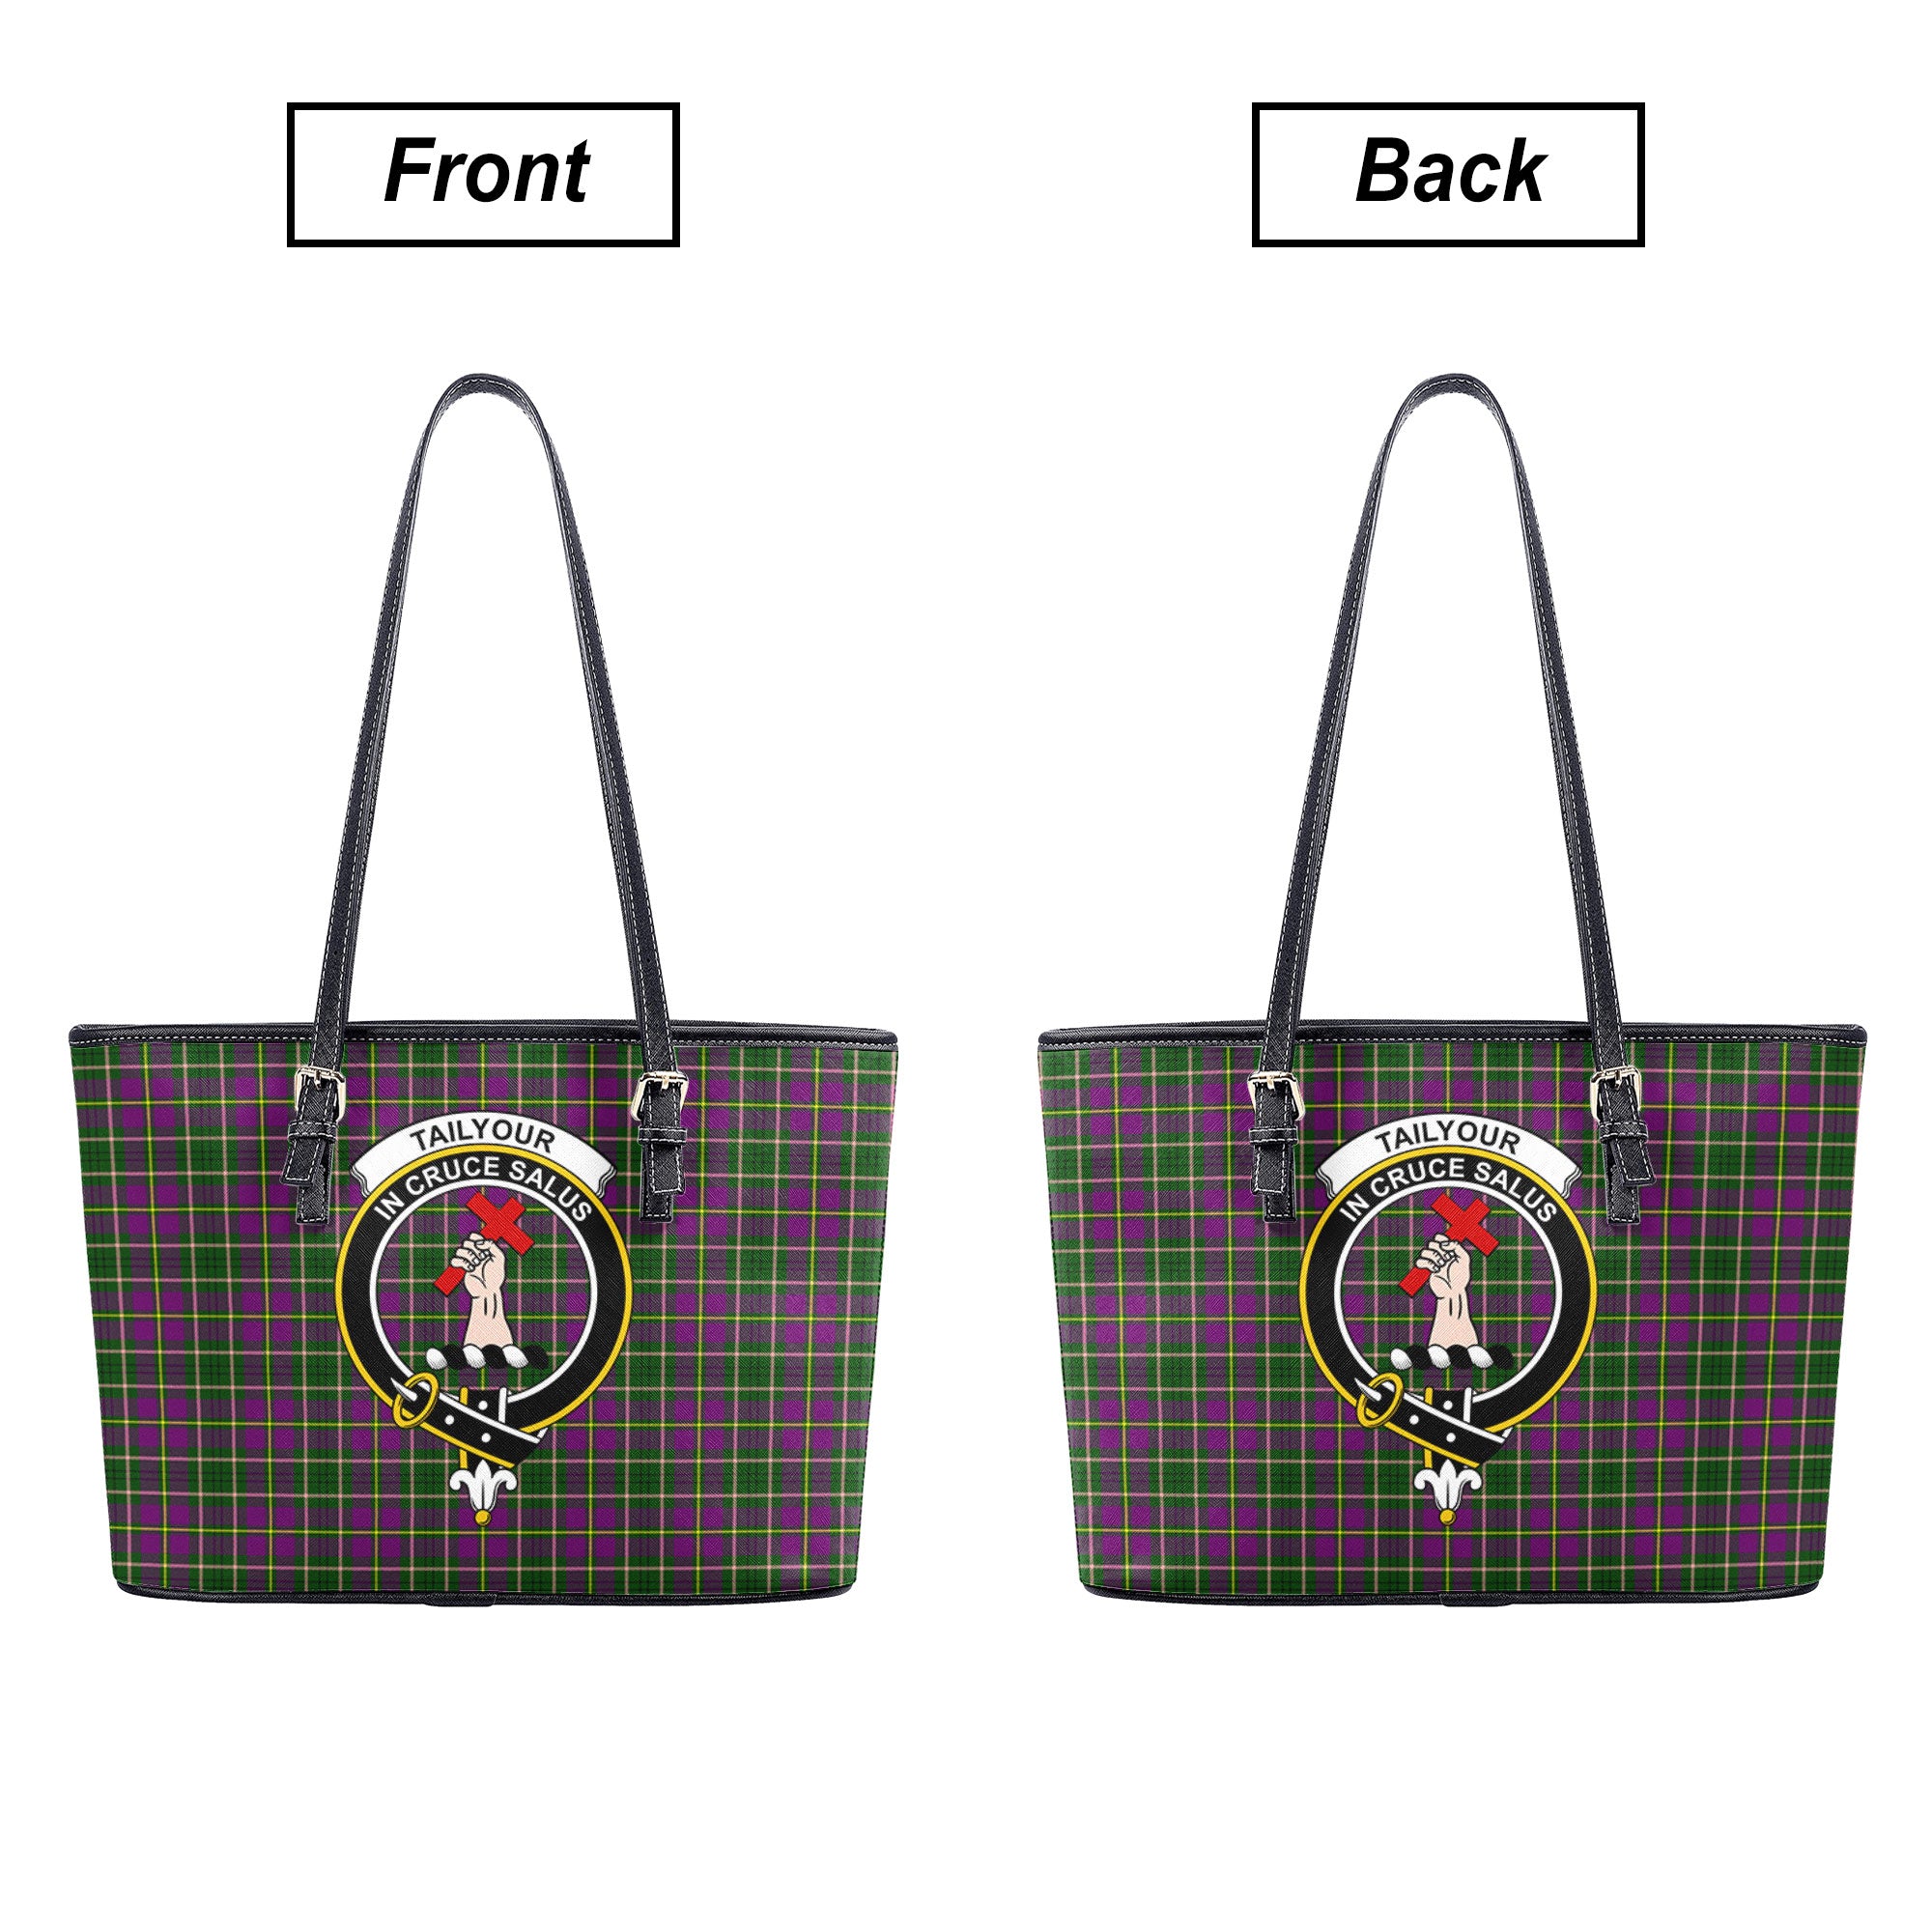 Tailyour (or Taylor) Tartan Crest Leather Tote Bag